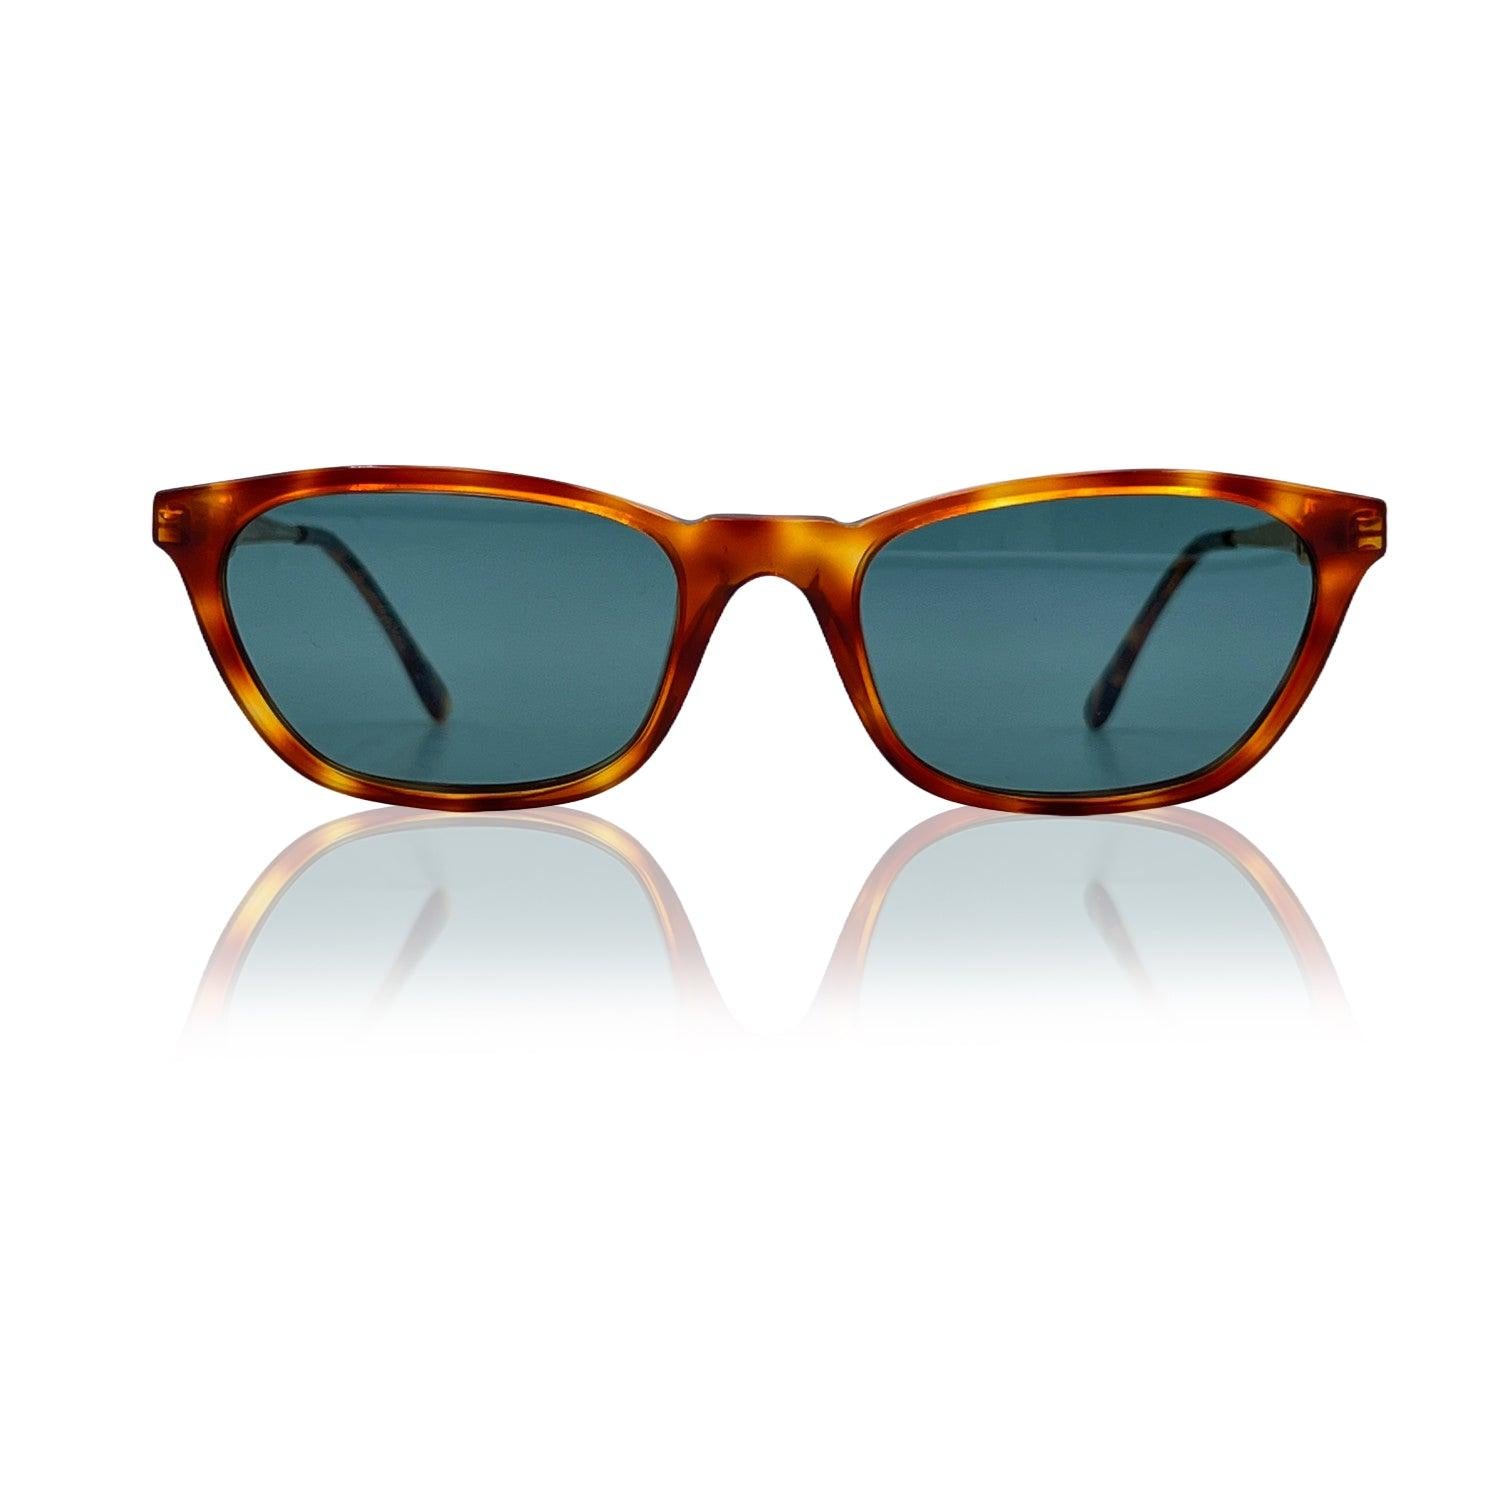 Brown acetate eyeglasses by Moschino by Persol. Rectangle design. Model: M55. 54/19 - 140 mm - logo on temples - New green glass mineral lense (Barberini). Brown tortoise front with gold metal ear stems with Moschino signatures on temples. Details